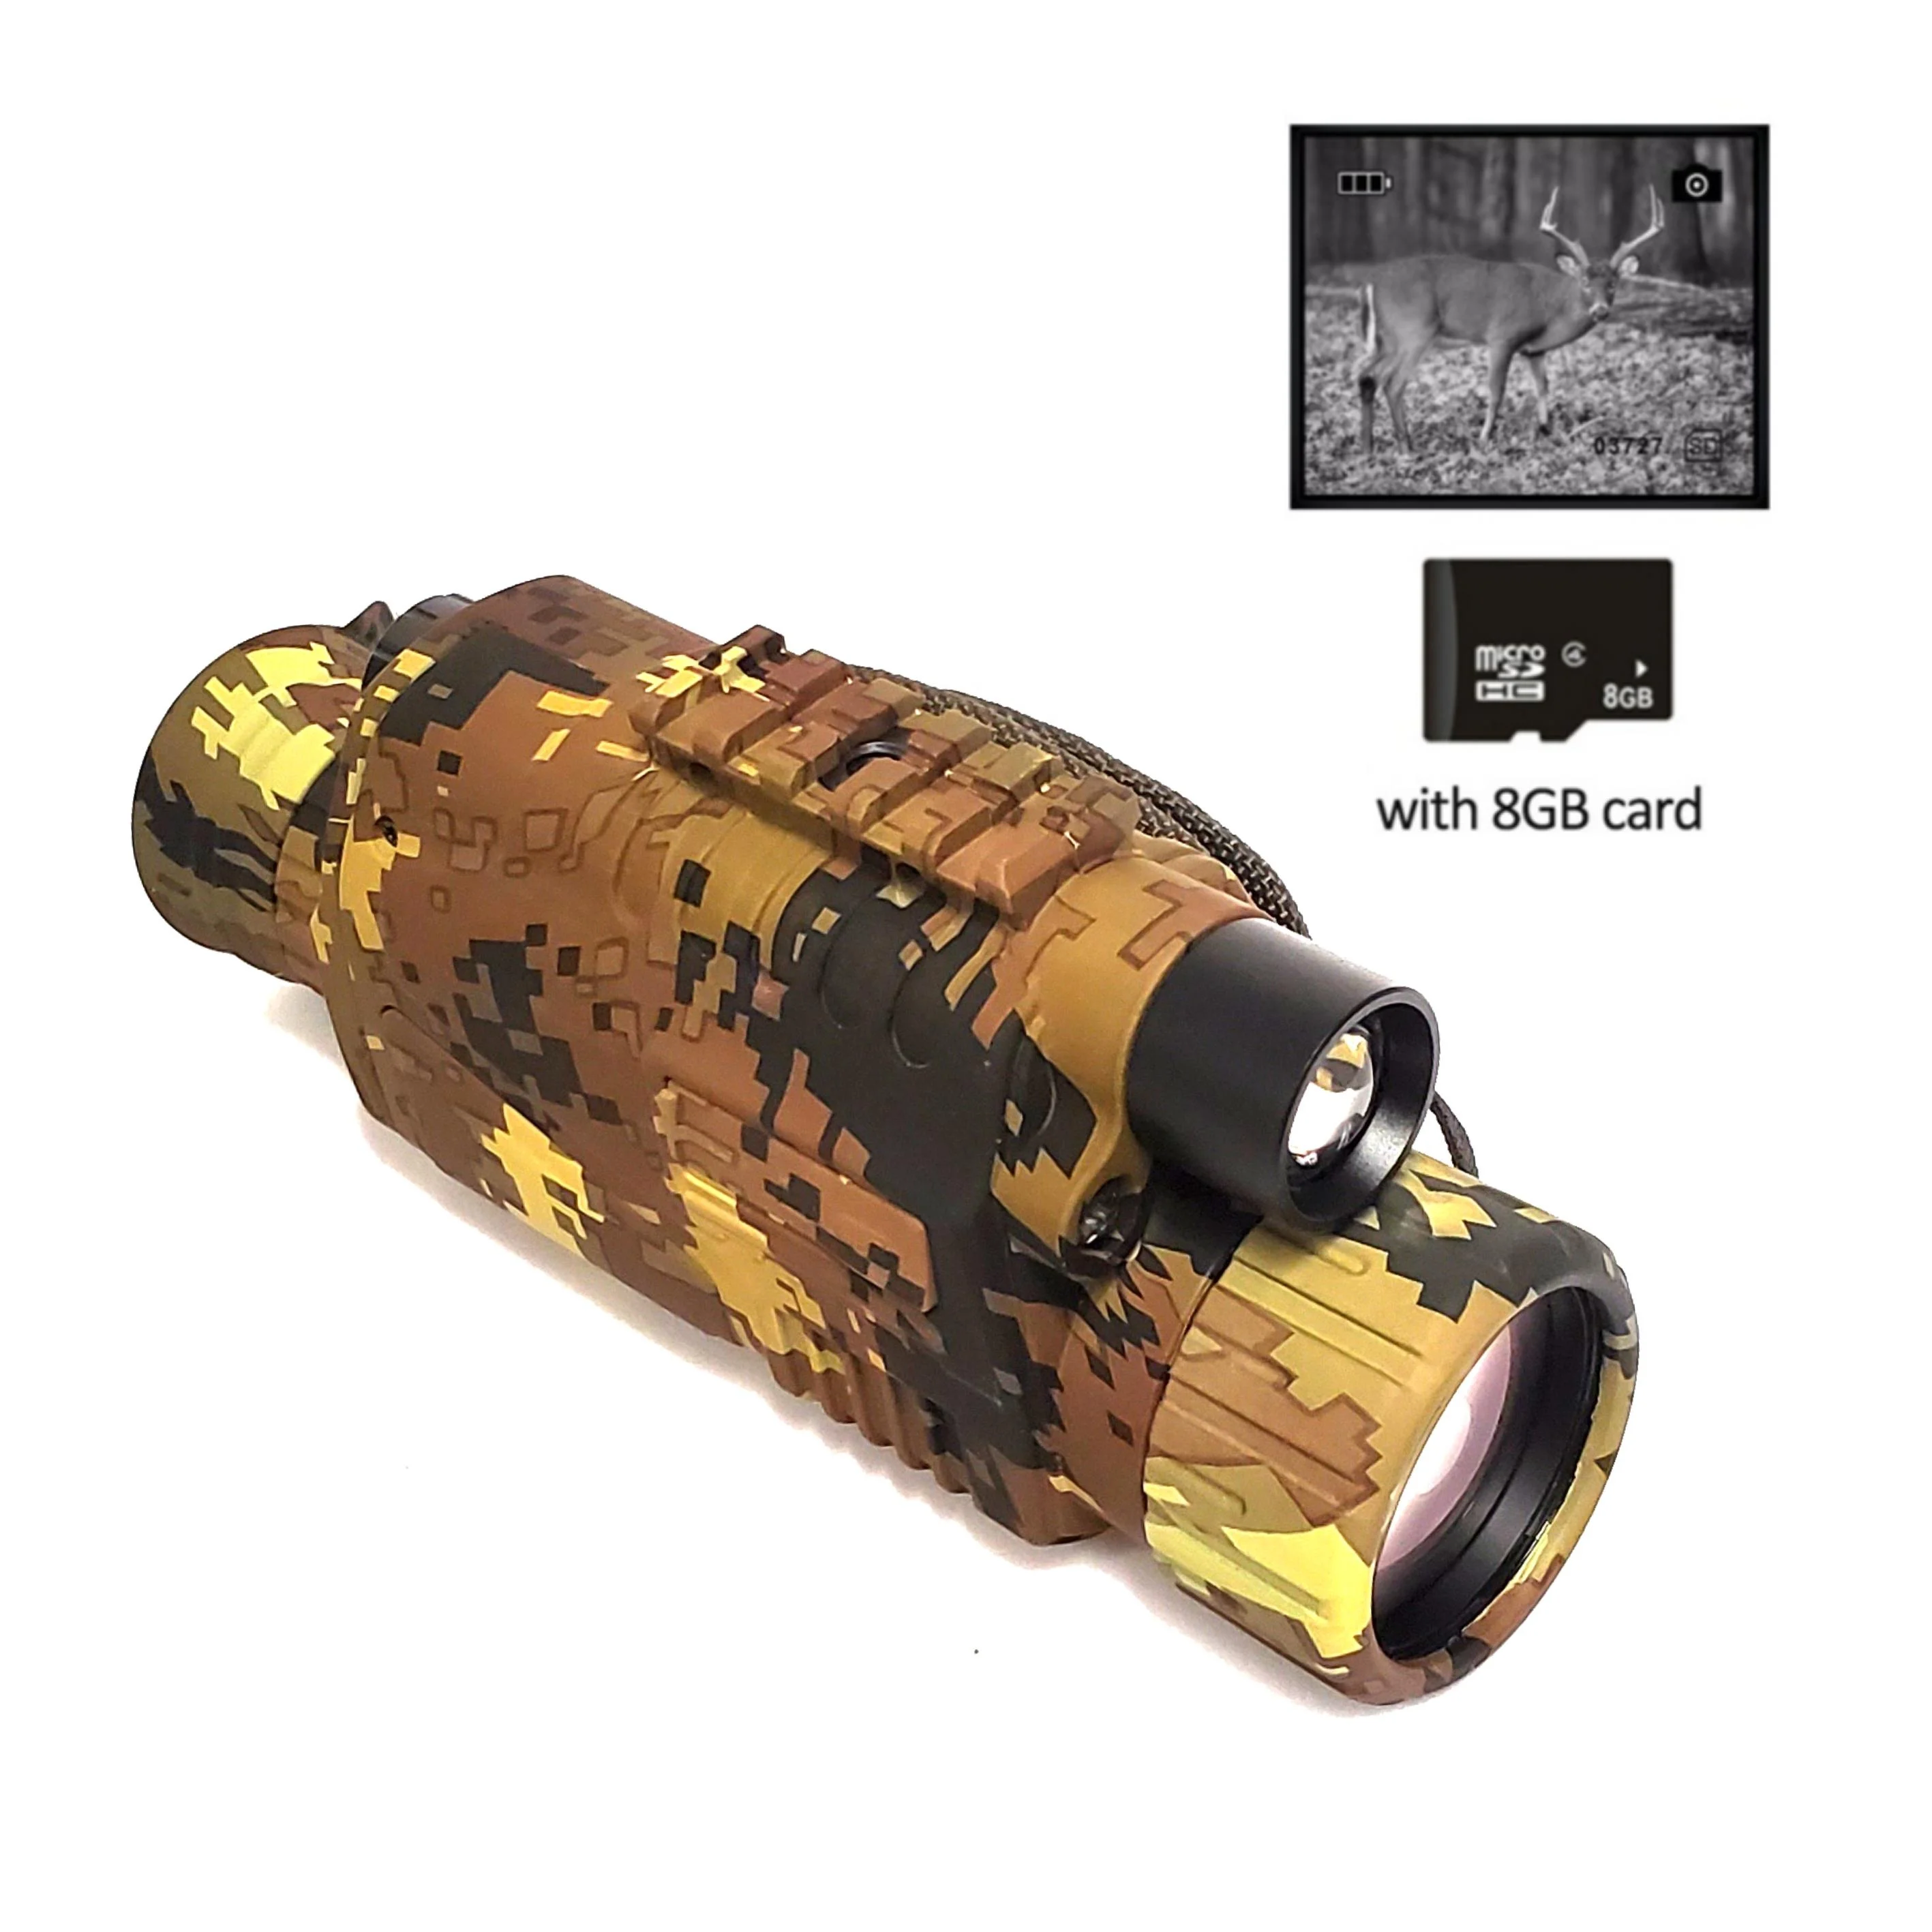 

Night Vision Monocular 5x40mm Digital zoom 8x Infrared Hunting Scope with Memory Card Day Night IR Image Record, Camouflage